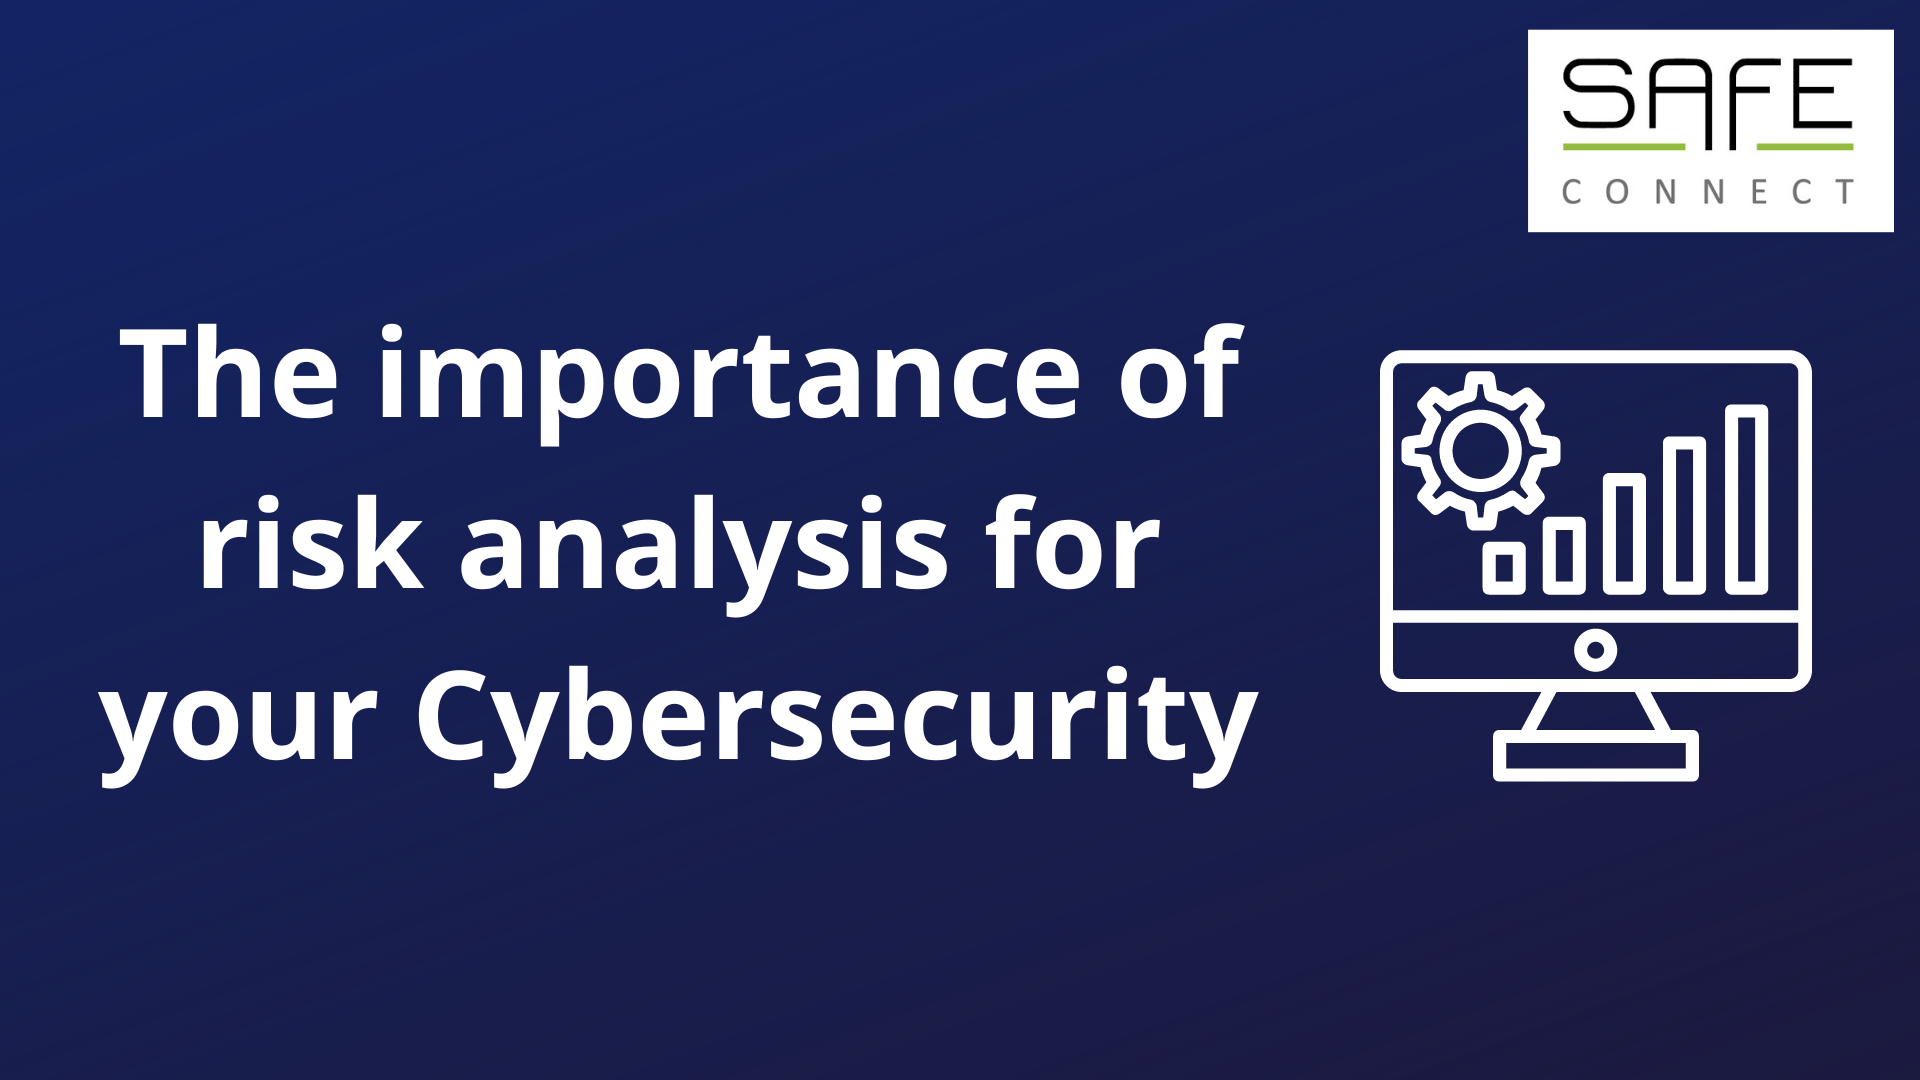 The importance of risk analysis for your Cybersecurity